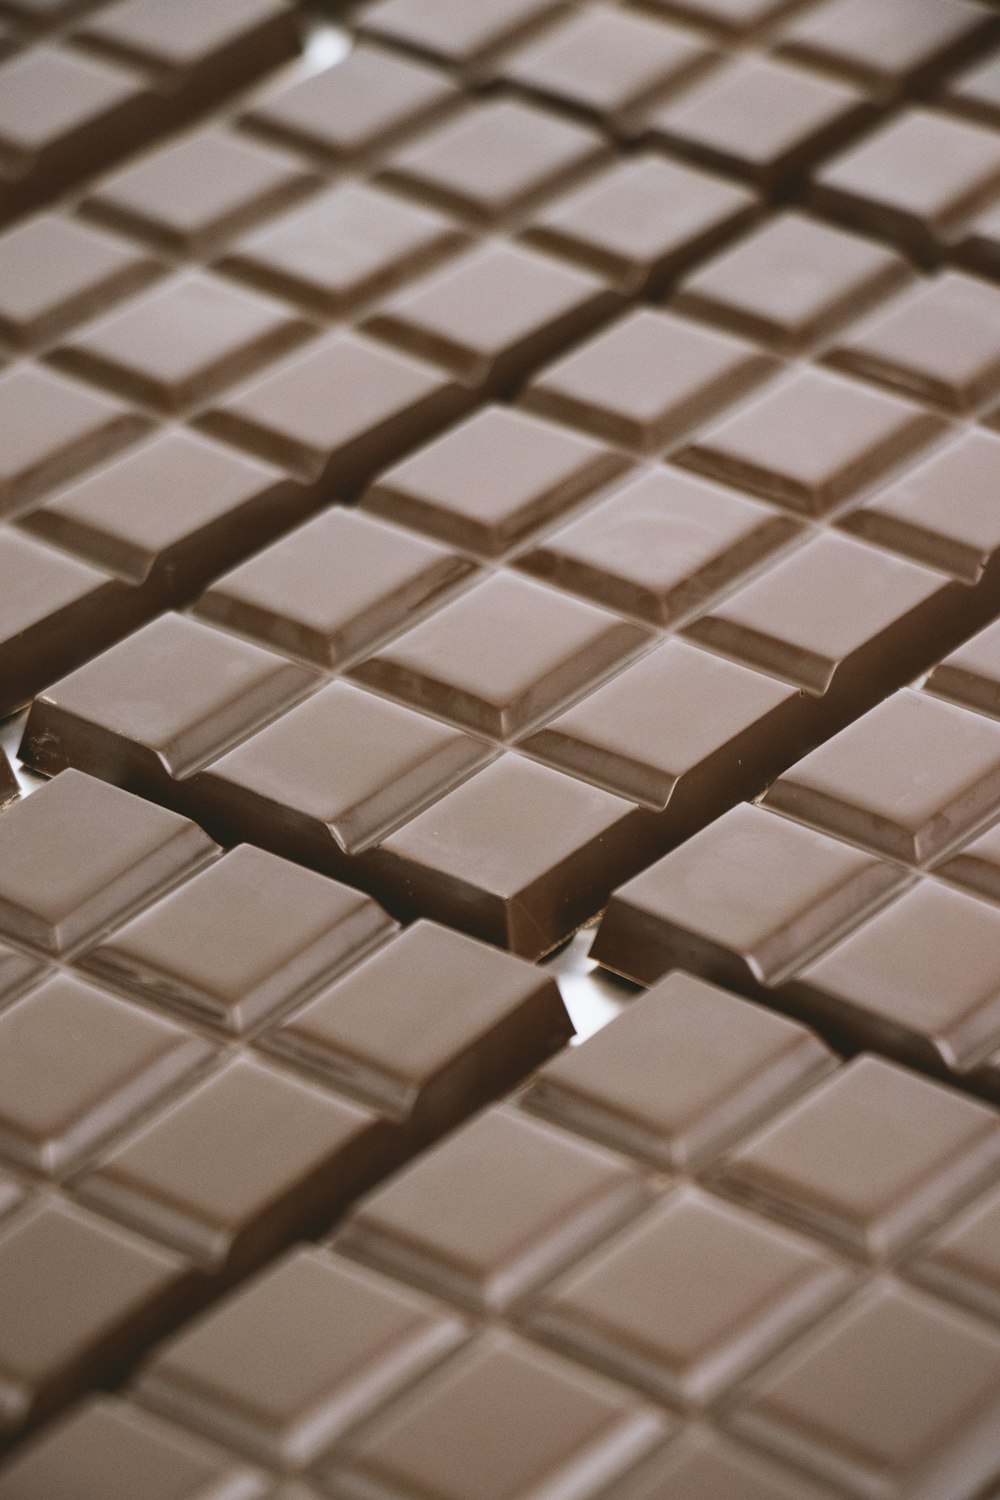 a close up of a chocolate bar with a bite taken out of it